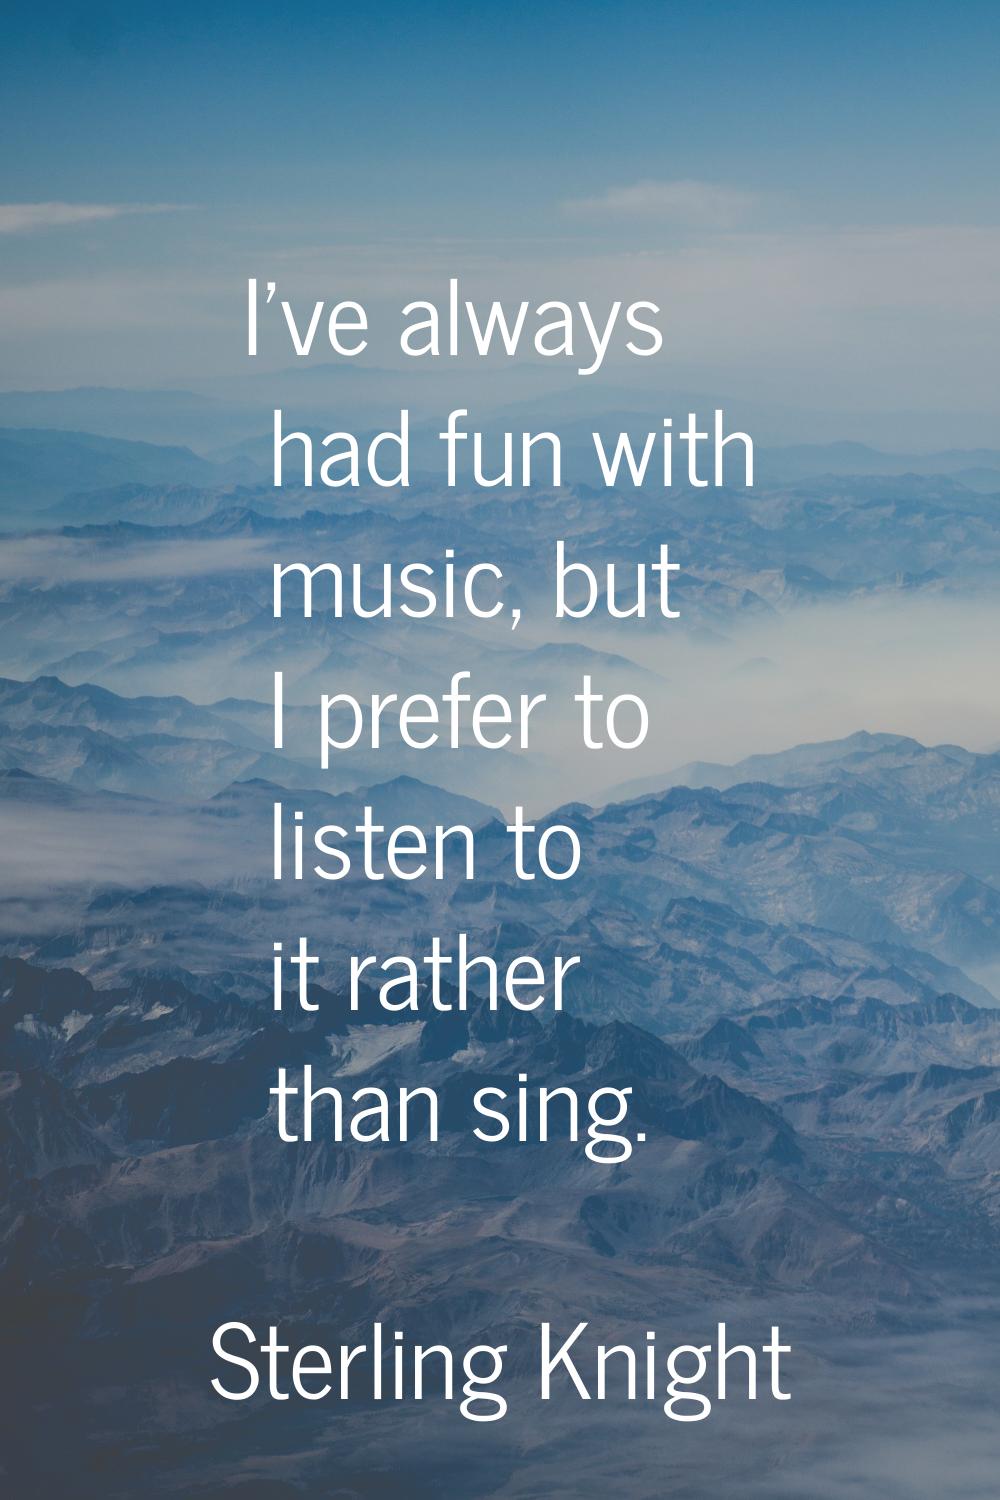 I've always had fun with music, but I prefer to listen to it rather than sing.